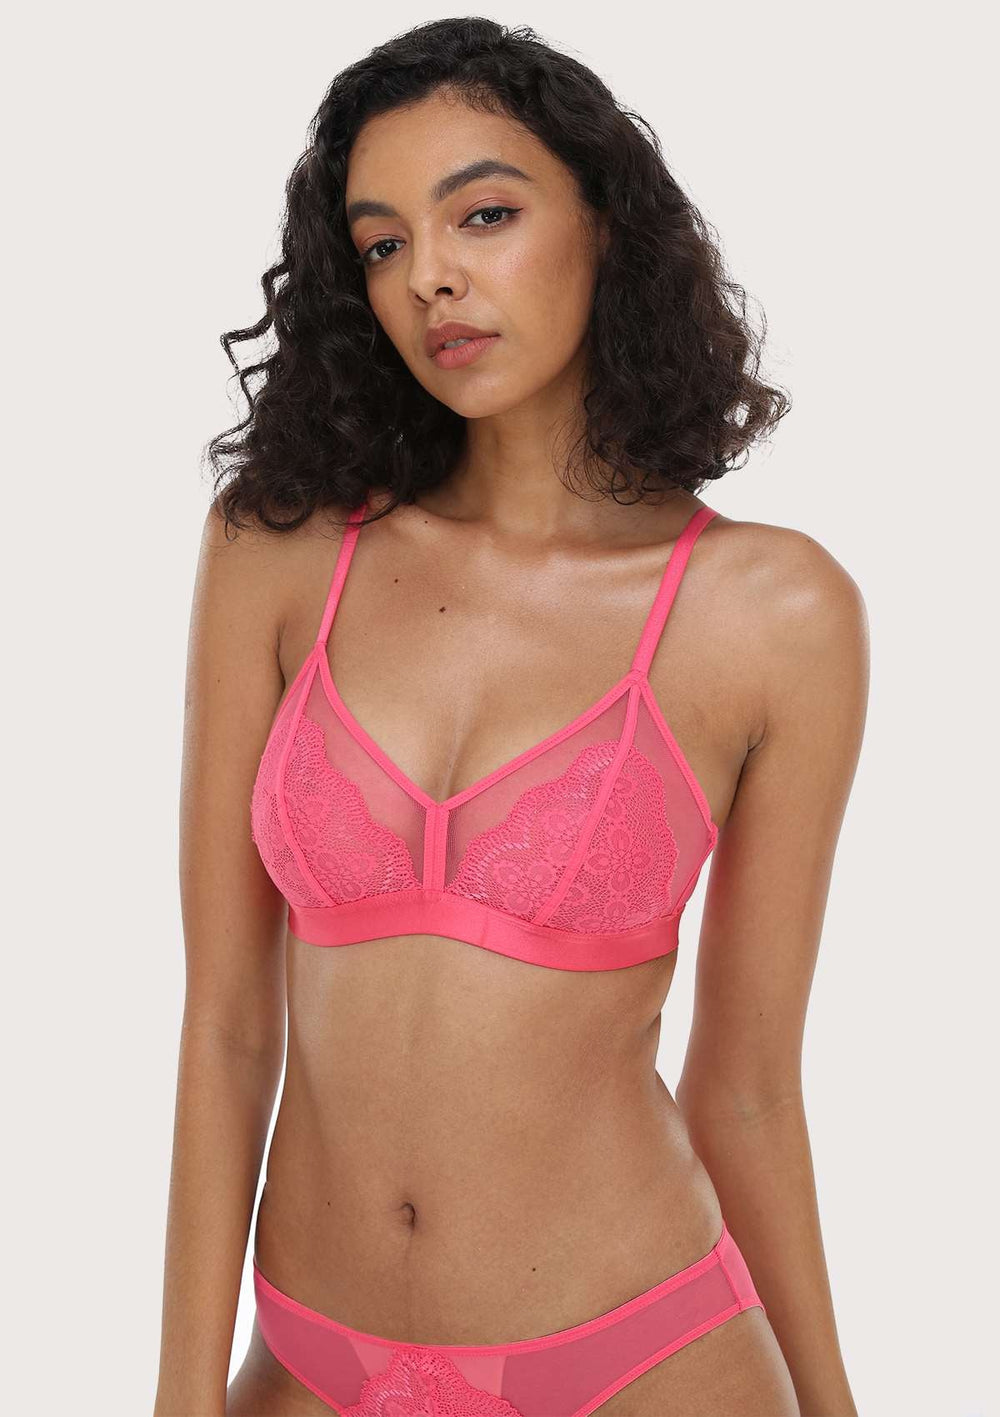 PINK Lace strappy triangle bra and brief set, Womens Lingerie